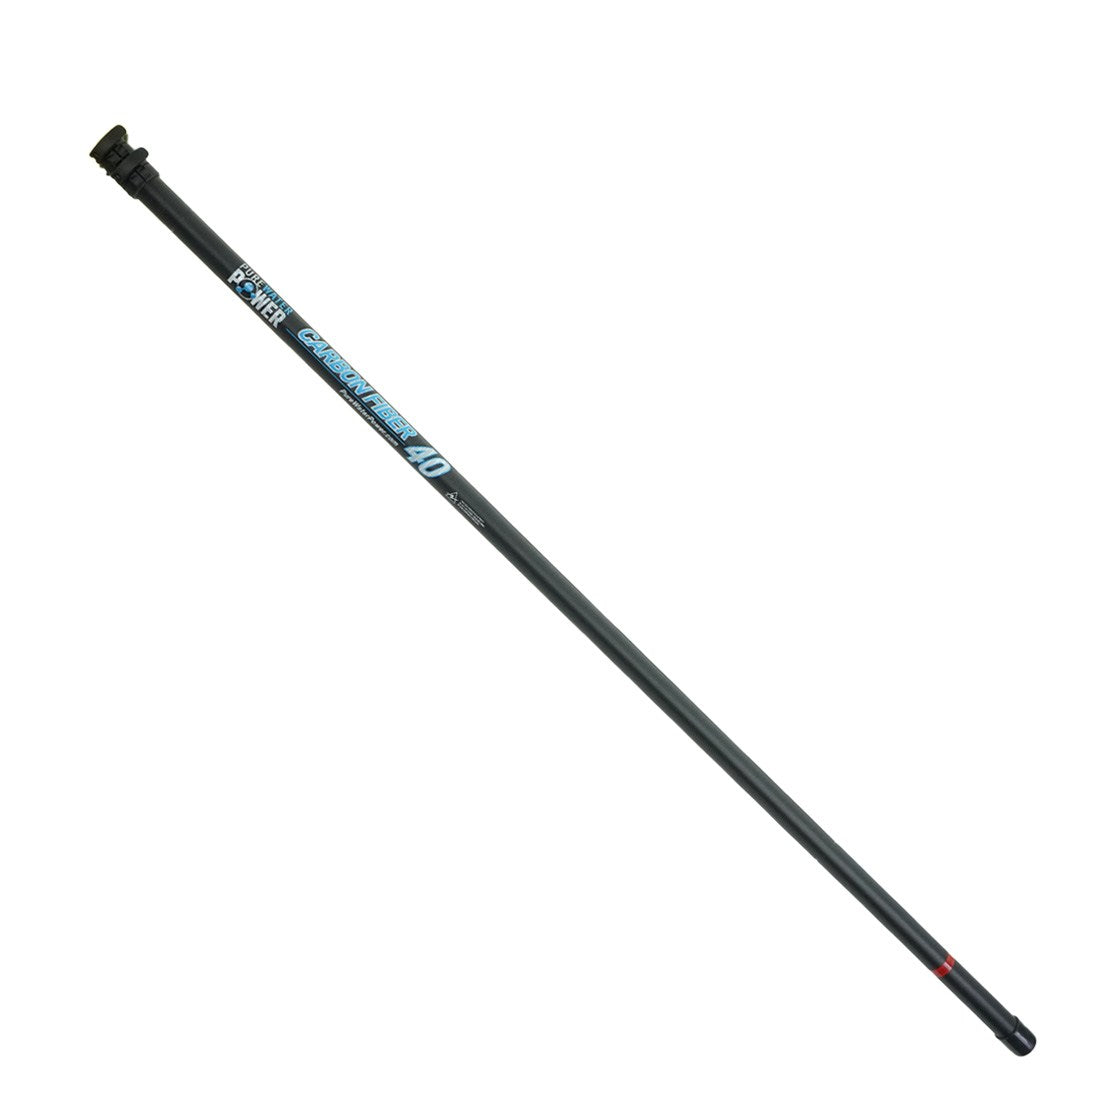 PWP Carbon Fiber Add-On Section, Water Fed Poles